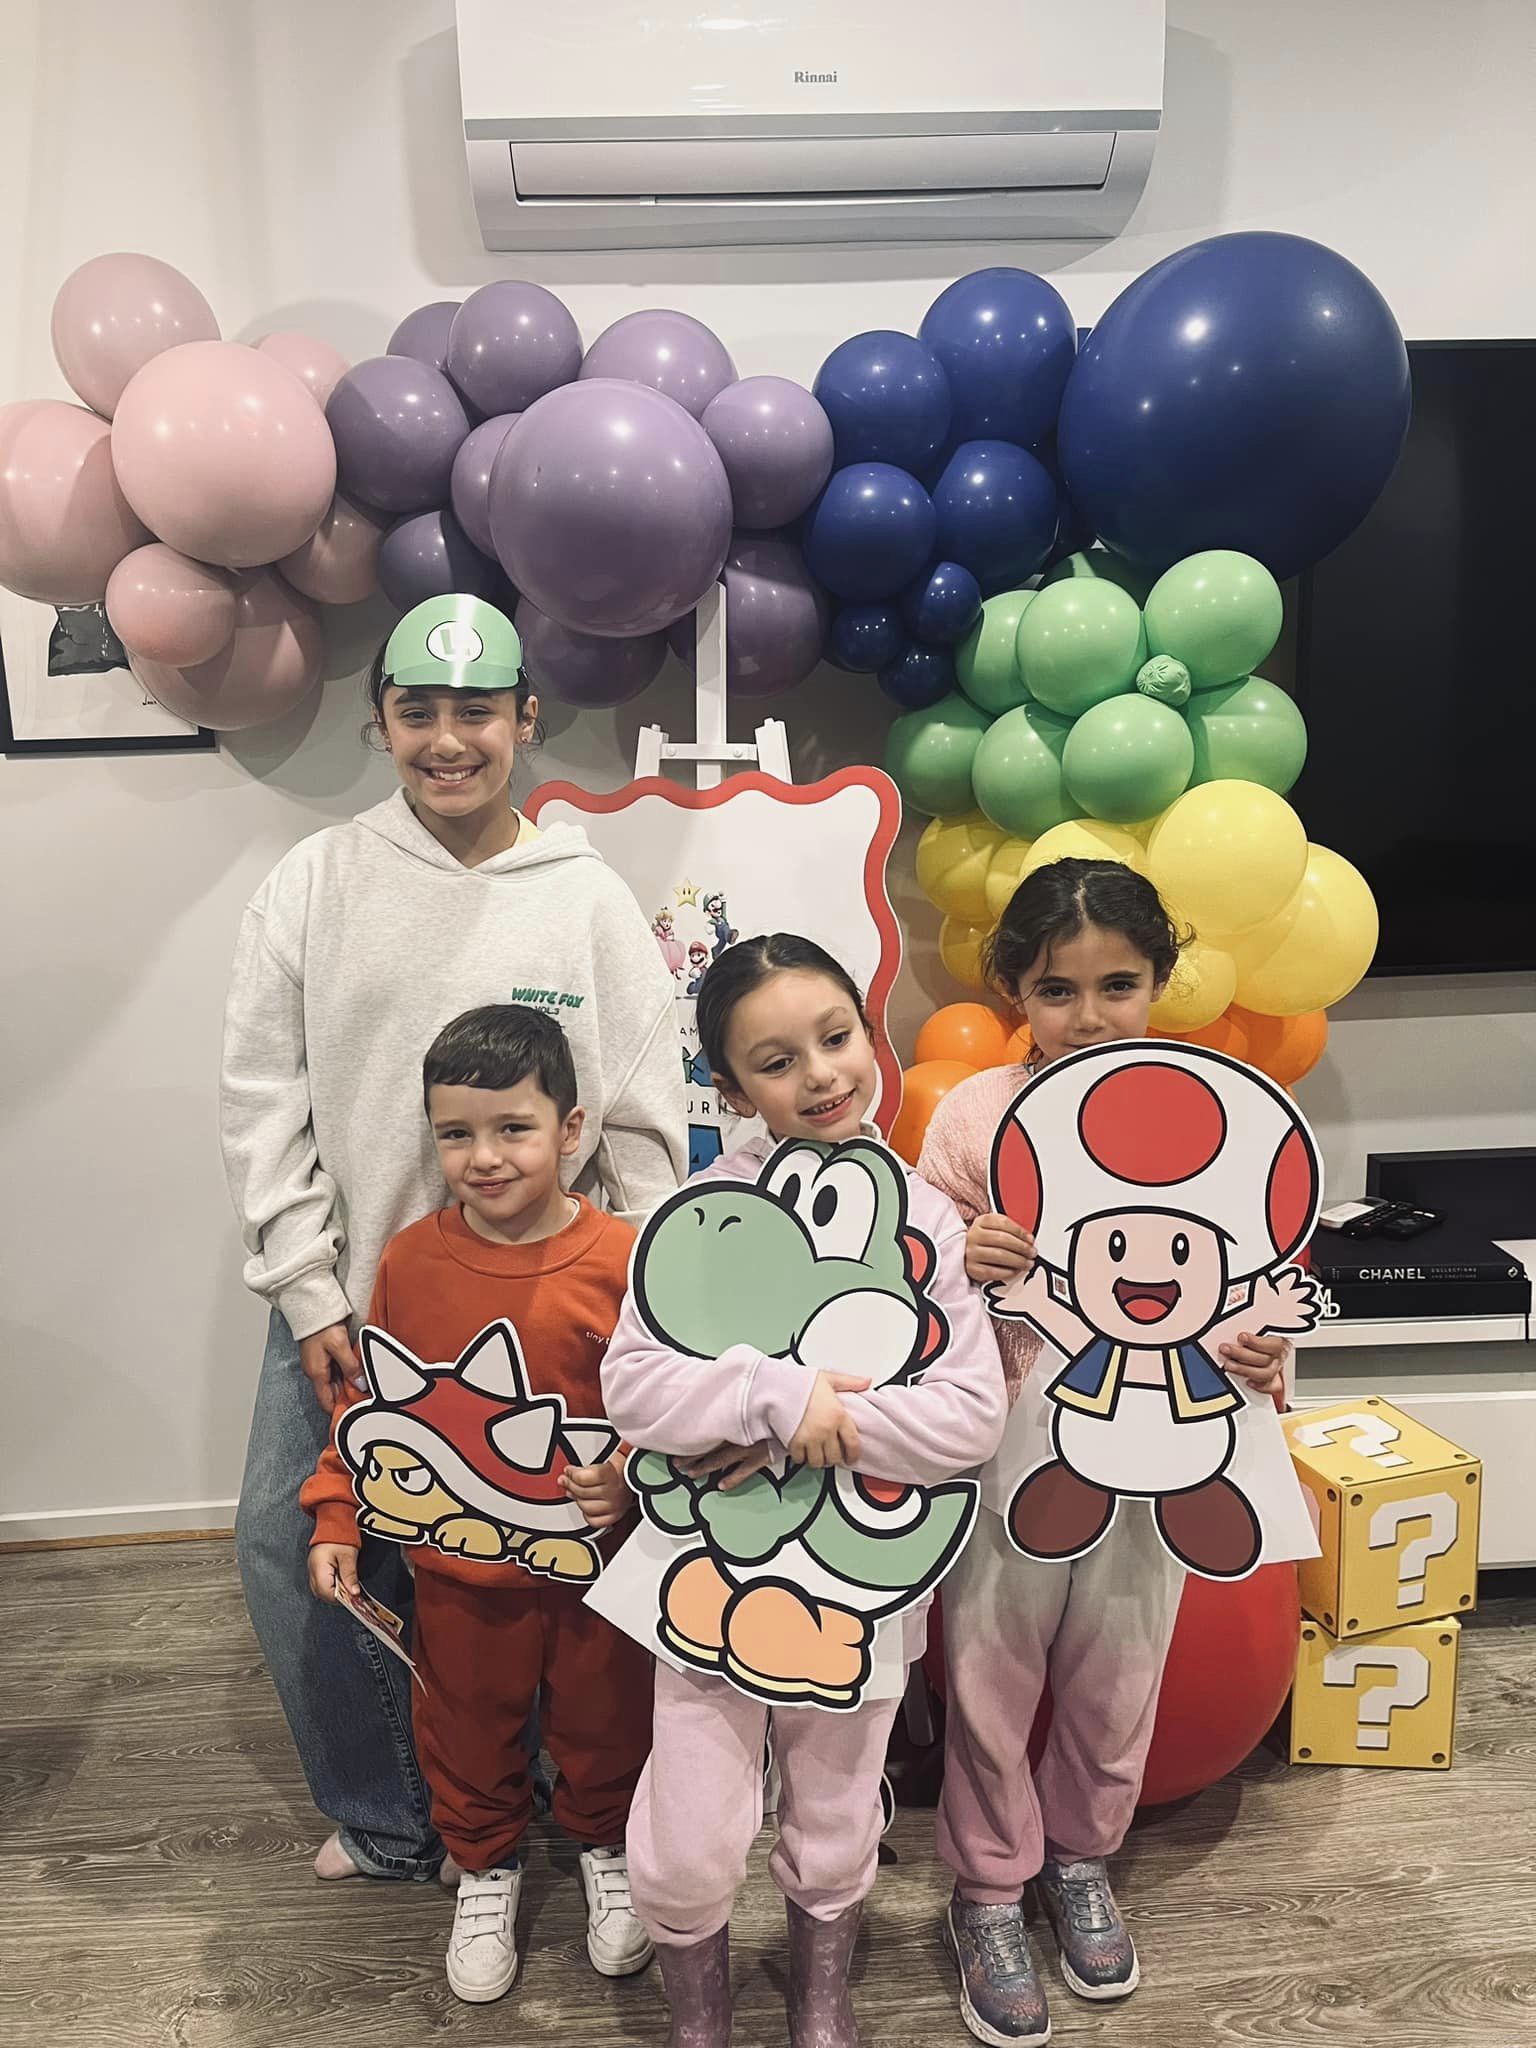 Super Mario Brothers Theme Package- Including Balloon Garland